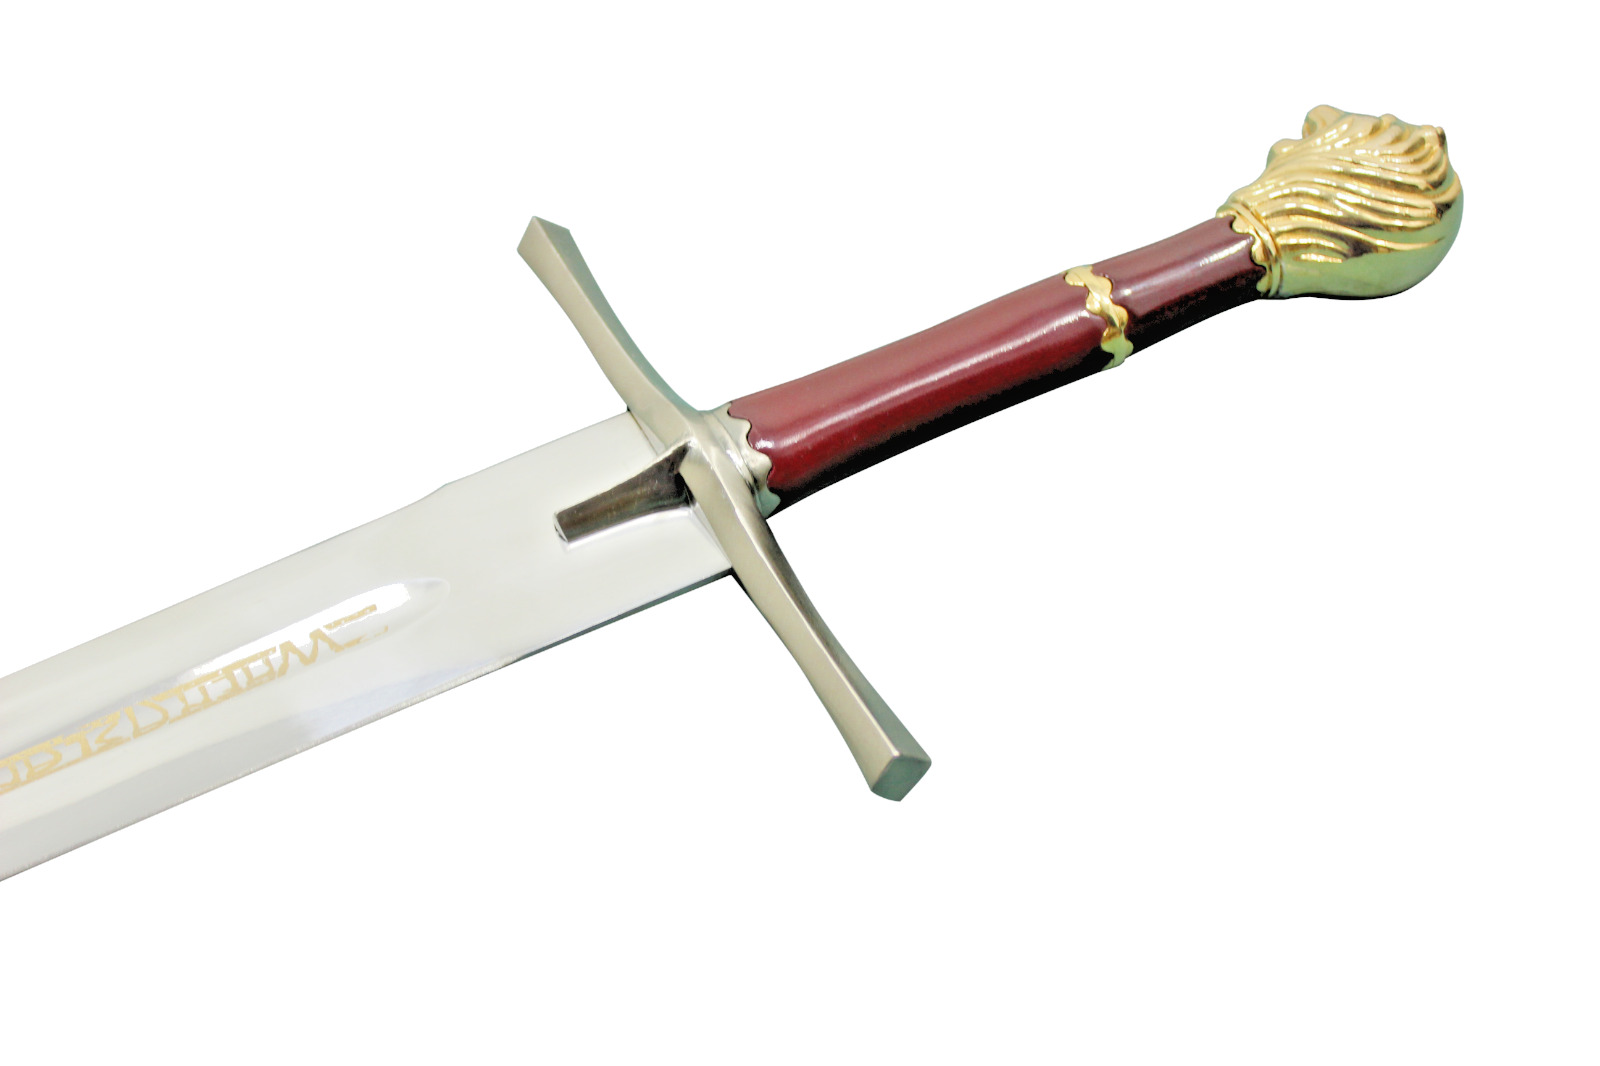 Narnia Sword With Wall Plaque, Handmade Cosplay Sword With Wall Plaque LOTRs